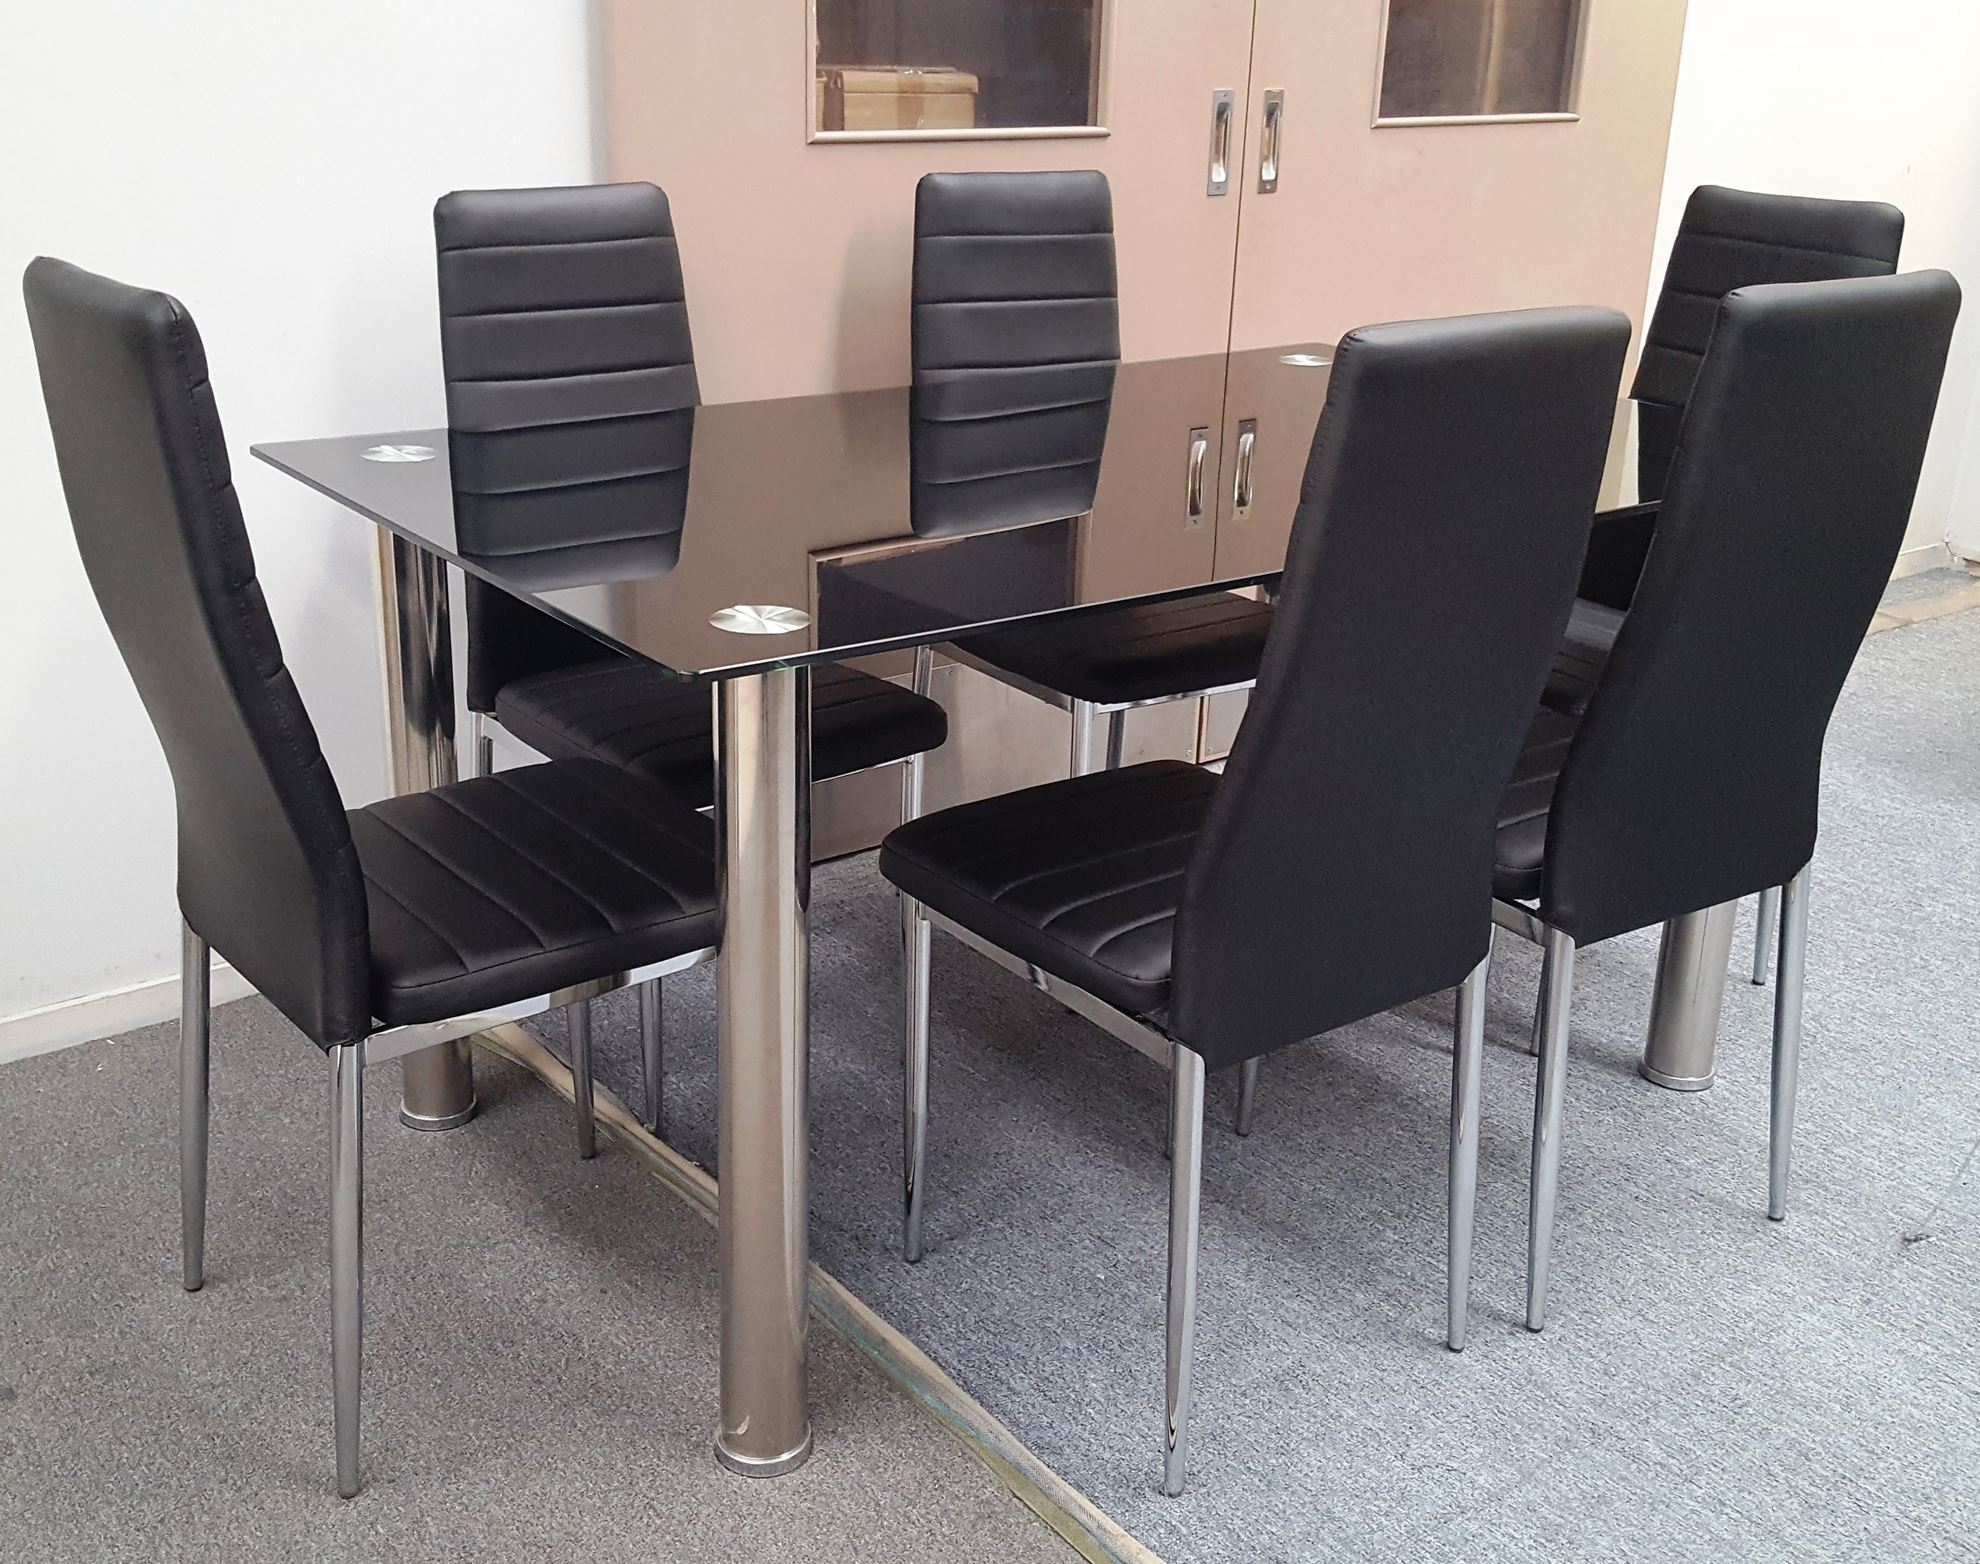 Furniture Place Melody Dining Table Black Glass 1 3x0 8m With 6 Black Mila Dining Chair